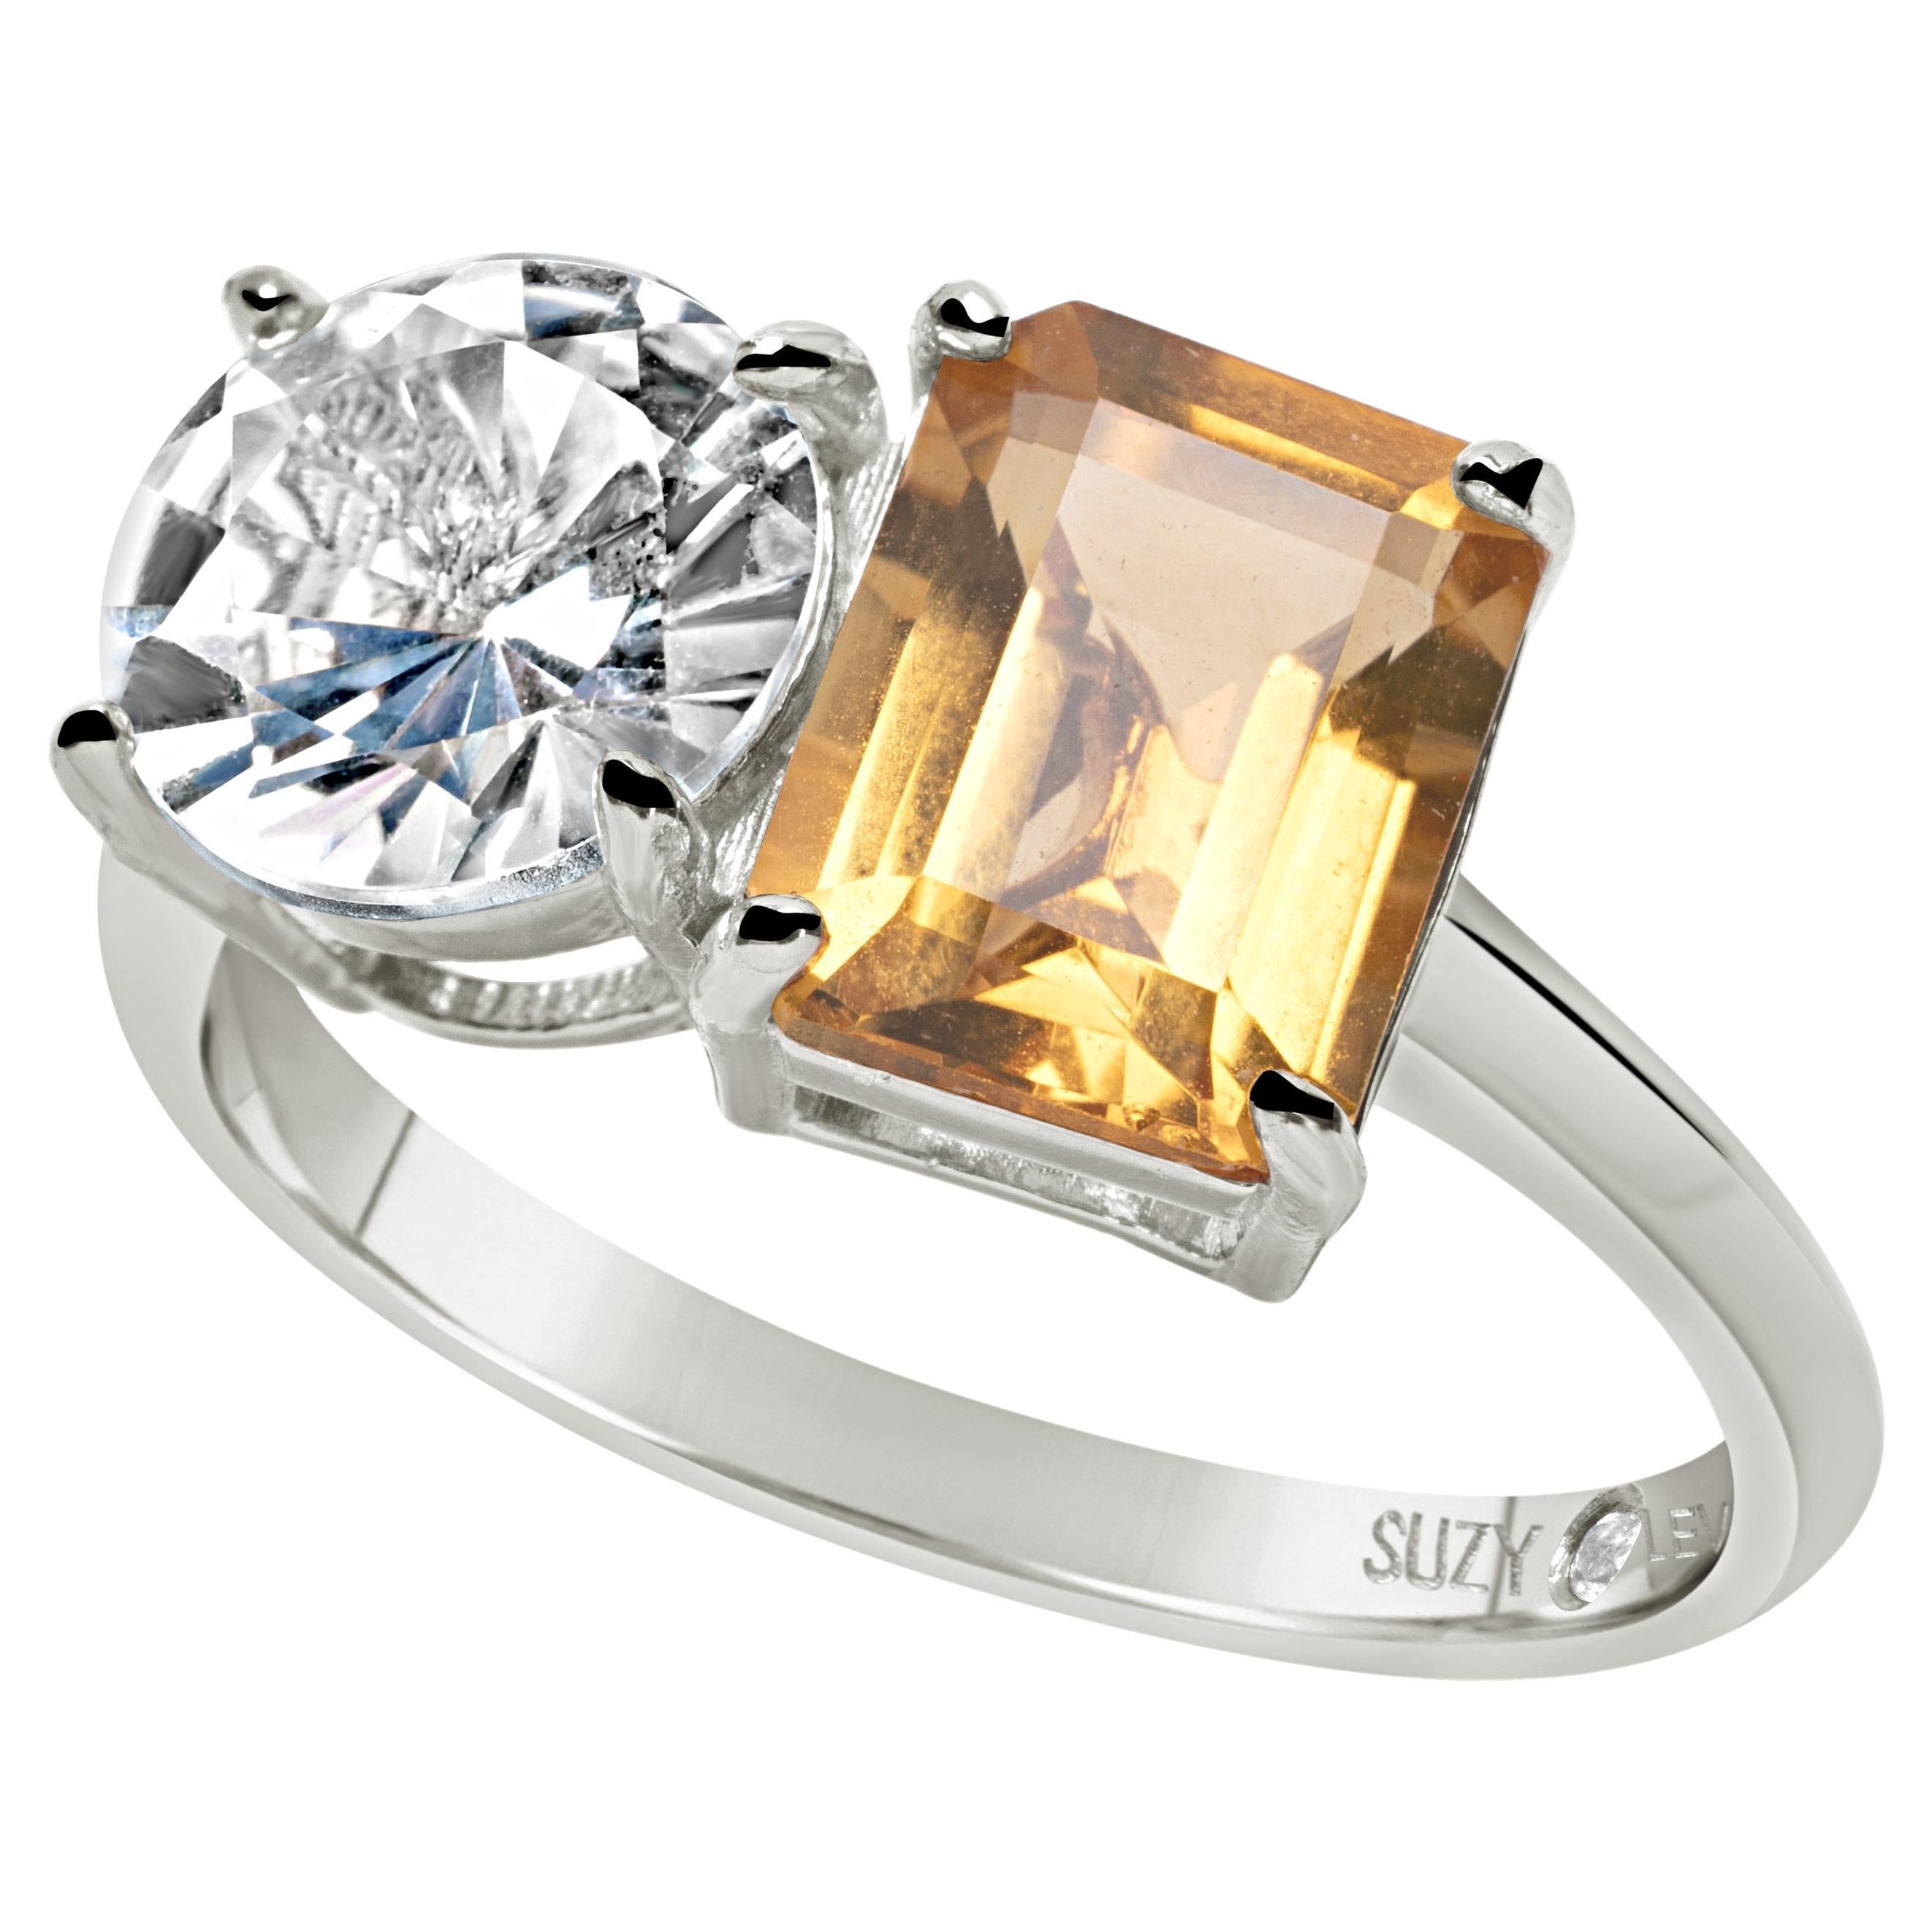 Suzy Levian Sterling Silver White Topaz & Orange Citrine Two Stone Ring For Sale